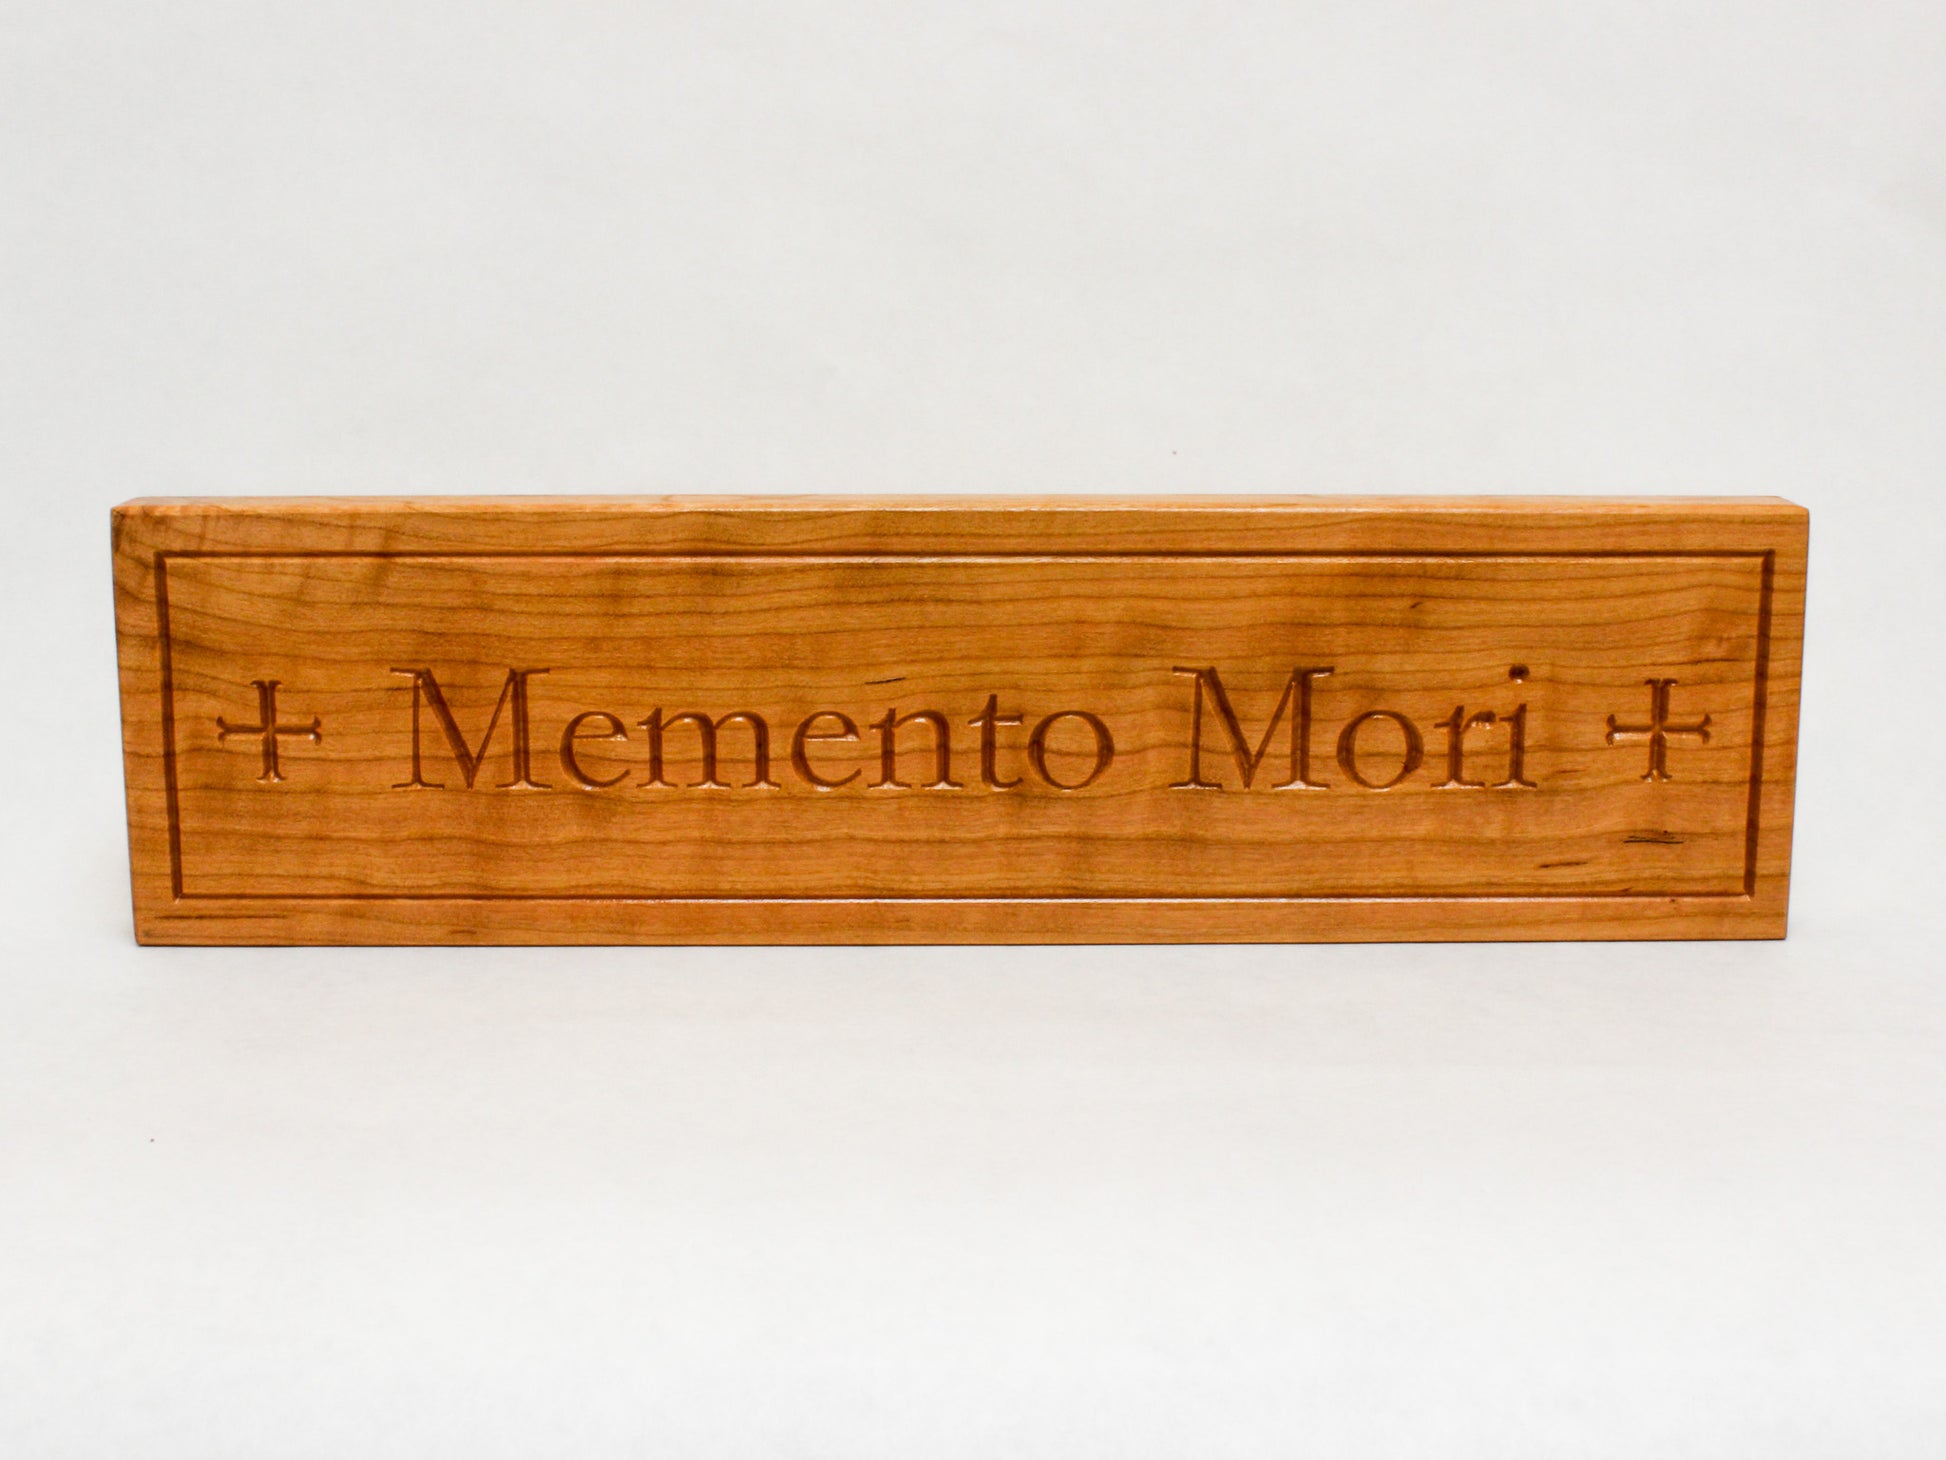 Wooden Lent Decoration: Memento Mori Sign engraved on free-standing wooden block featuring the moline cross on either side of the text